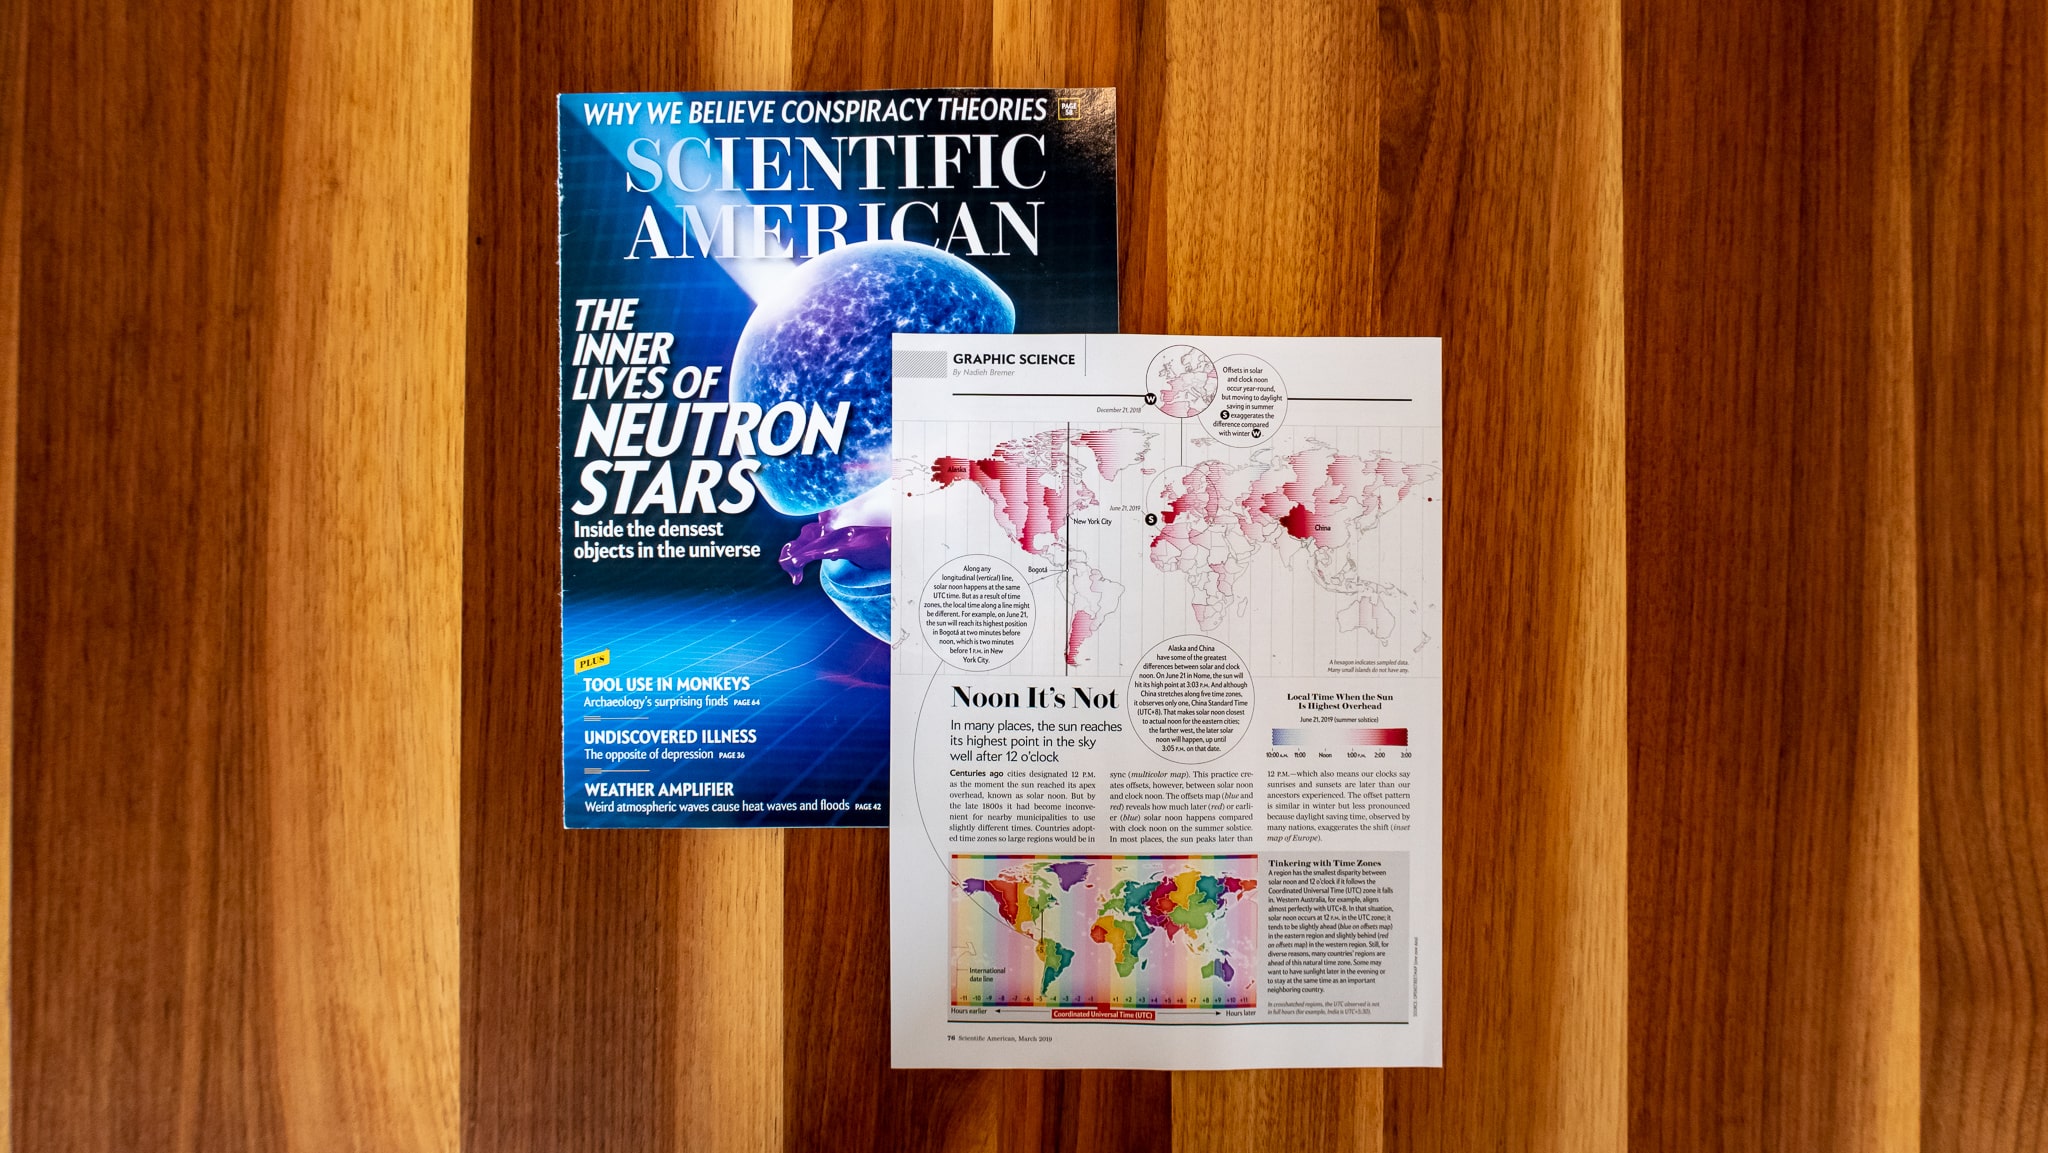 The Graphic Science page together with the rest of the March 2019 Scientific American issue